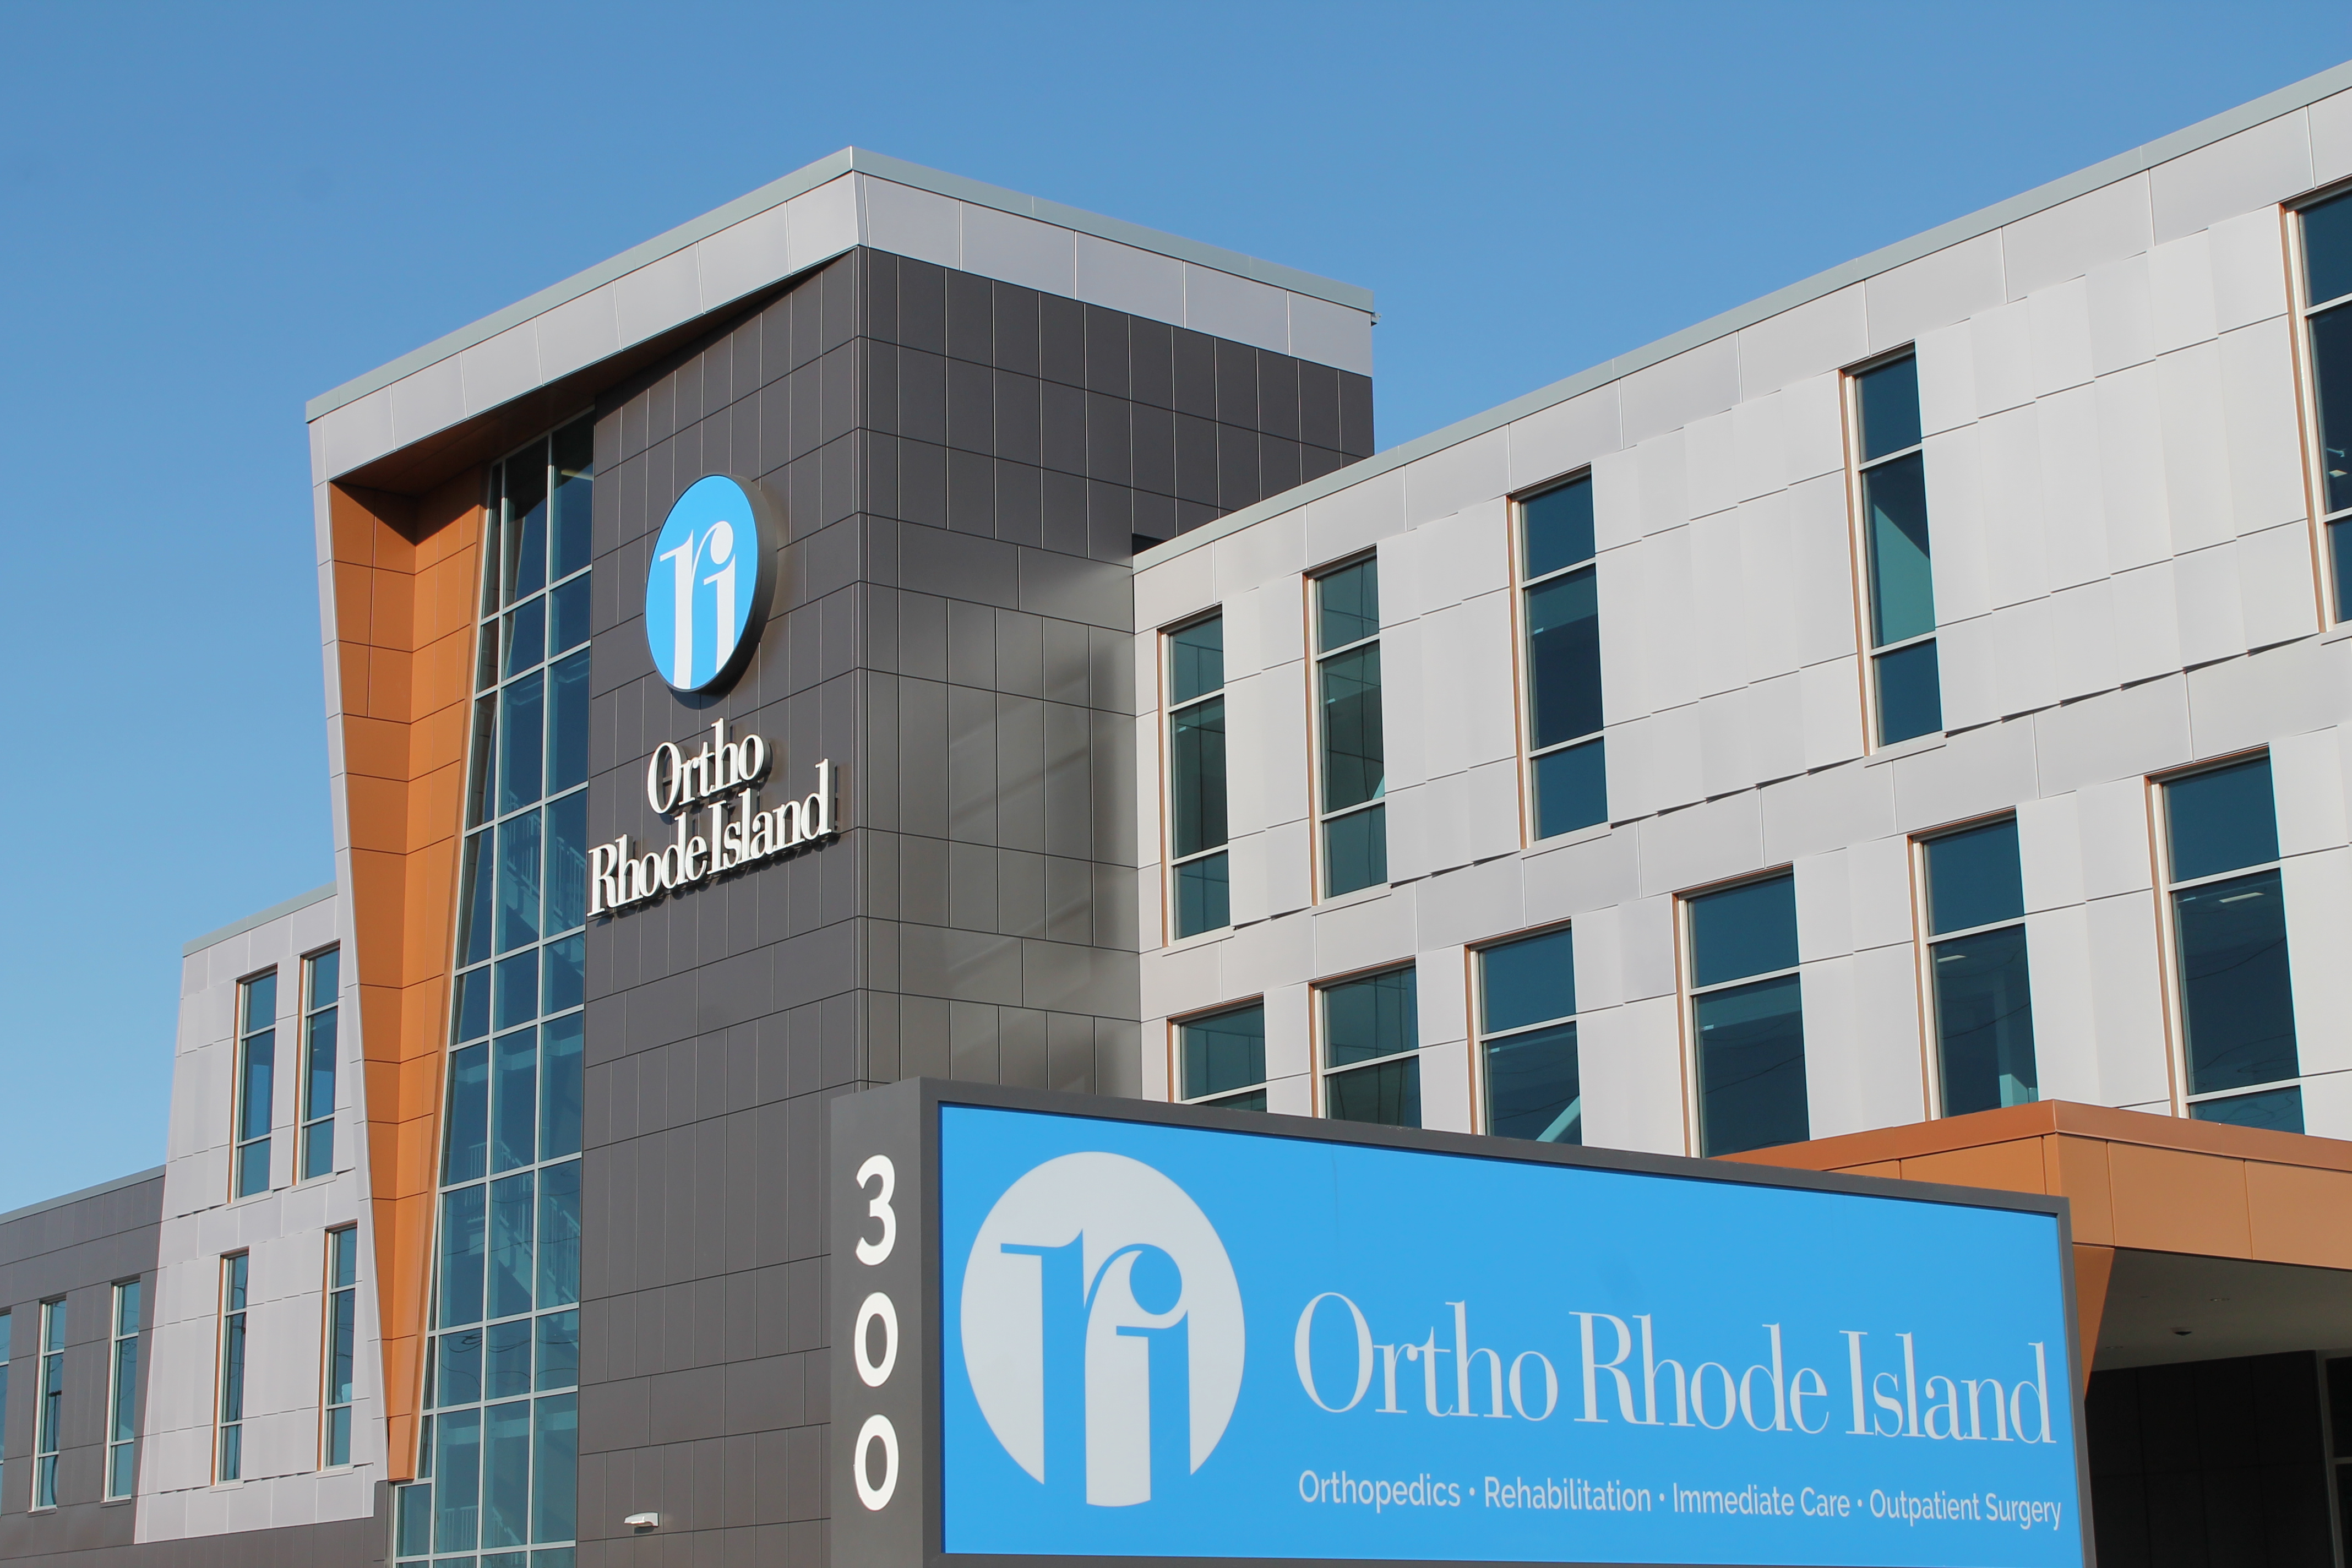 Ortho Rhode Island's Warwick Campus at 300 Crossings Boulevard, Warwick, RI 02886 offers world-class Orthopedics, Outpatient Surgery, Sports Medicine, Ortho RI Biologics, Physical Therapy, Advanced Imaging, and Ortho RI Express Acute Injury Care.